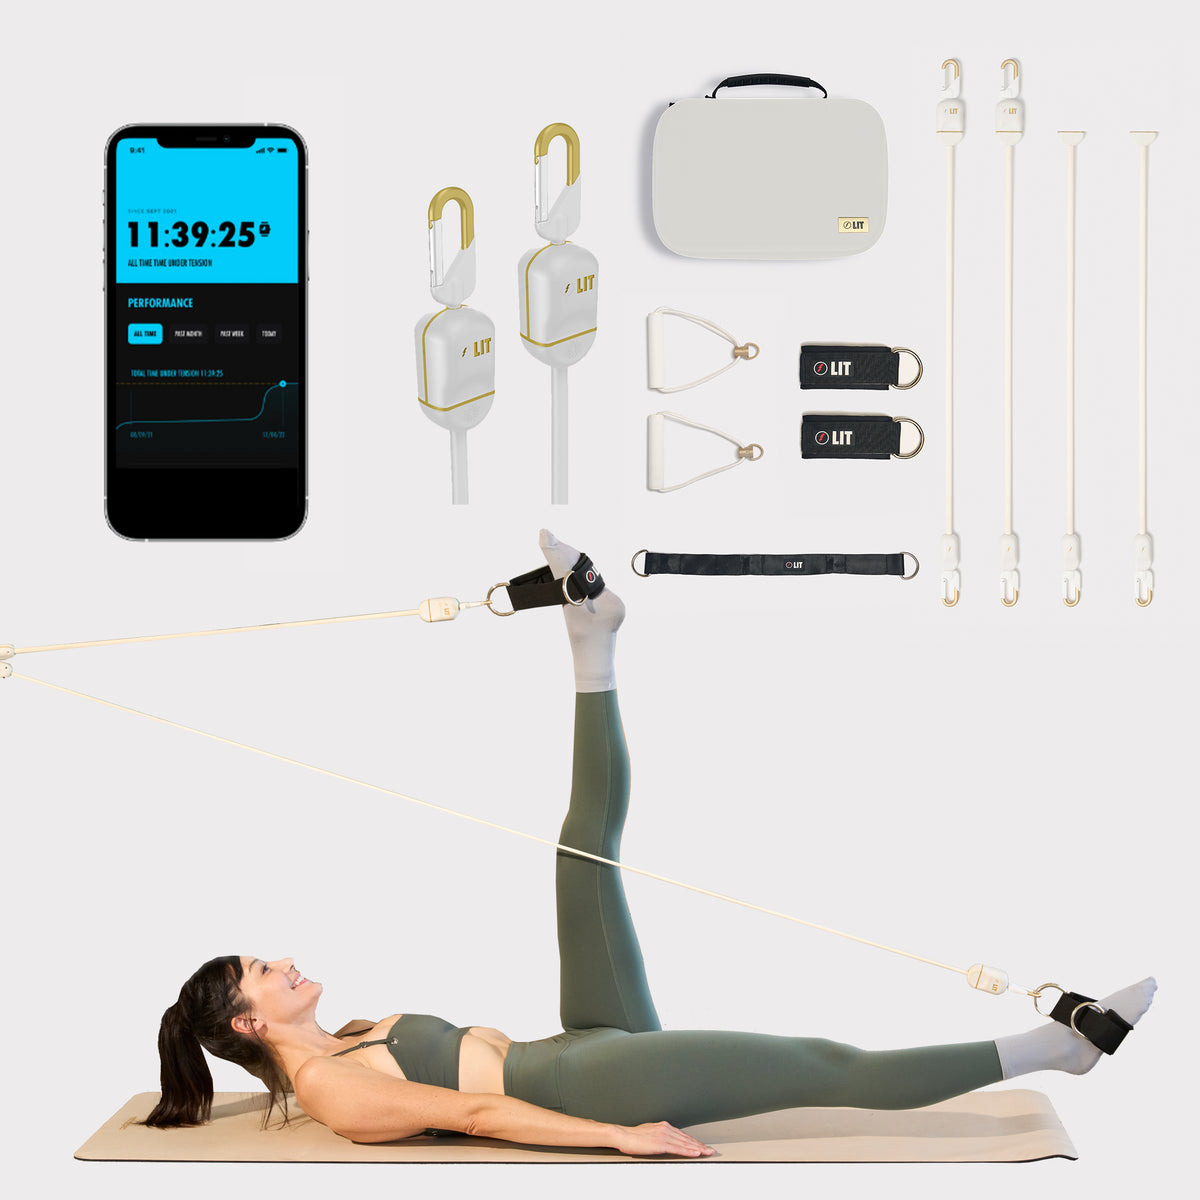 LIT Axis with all accessories and a woman doing workout with LIT Axis smart resistance bands